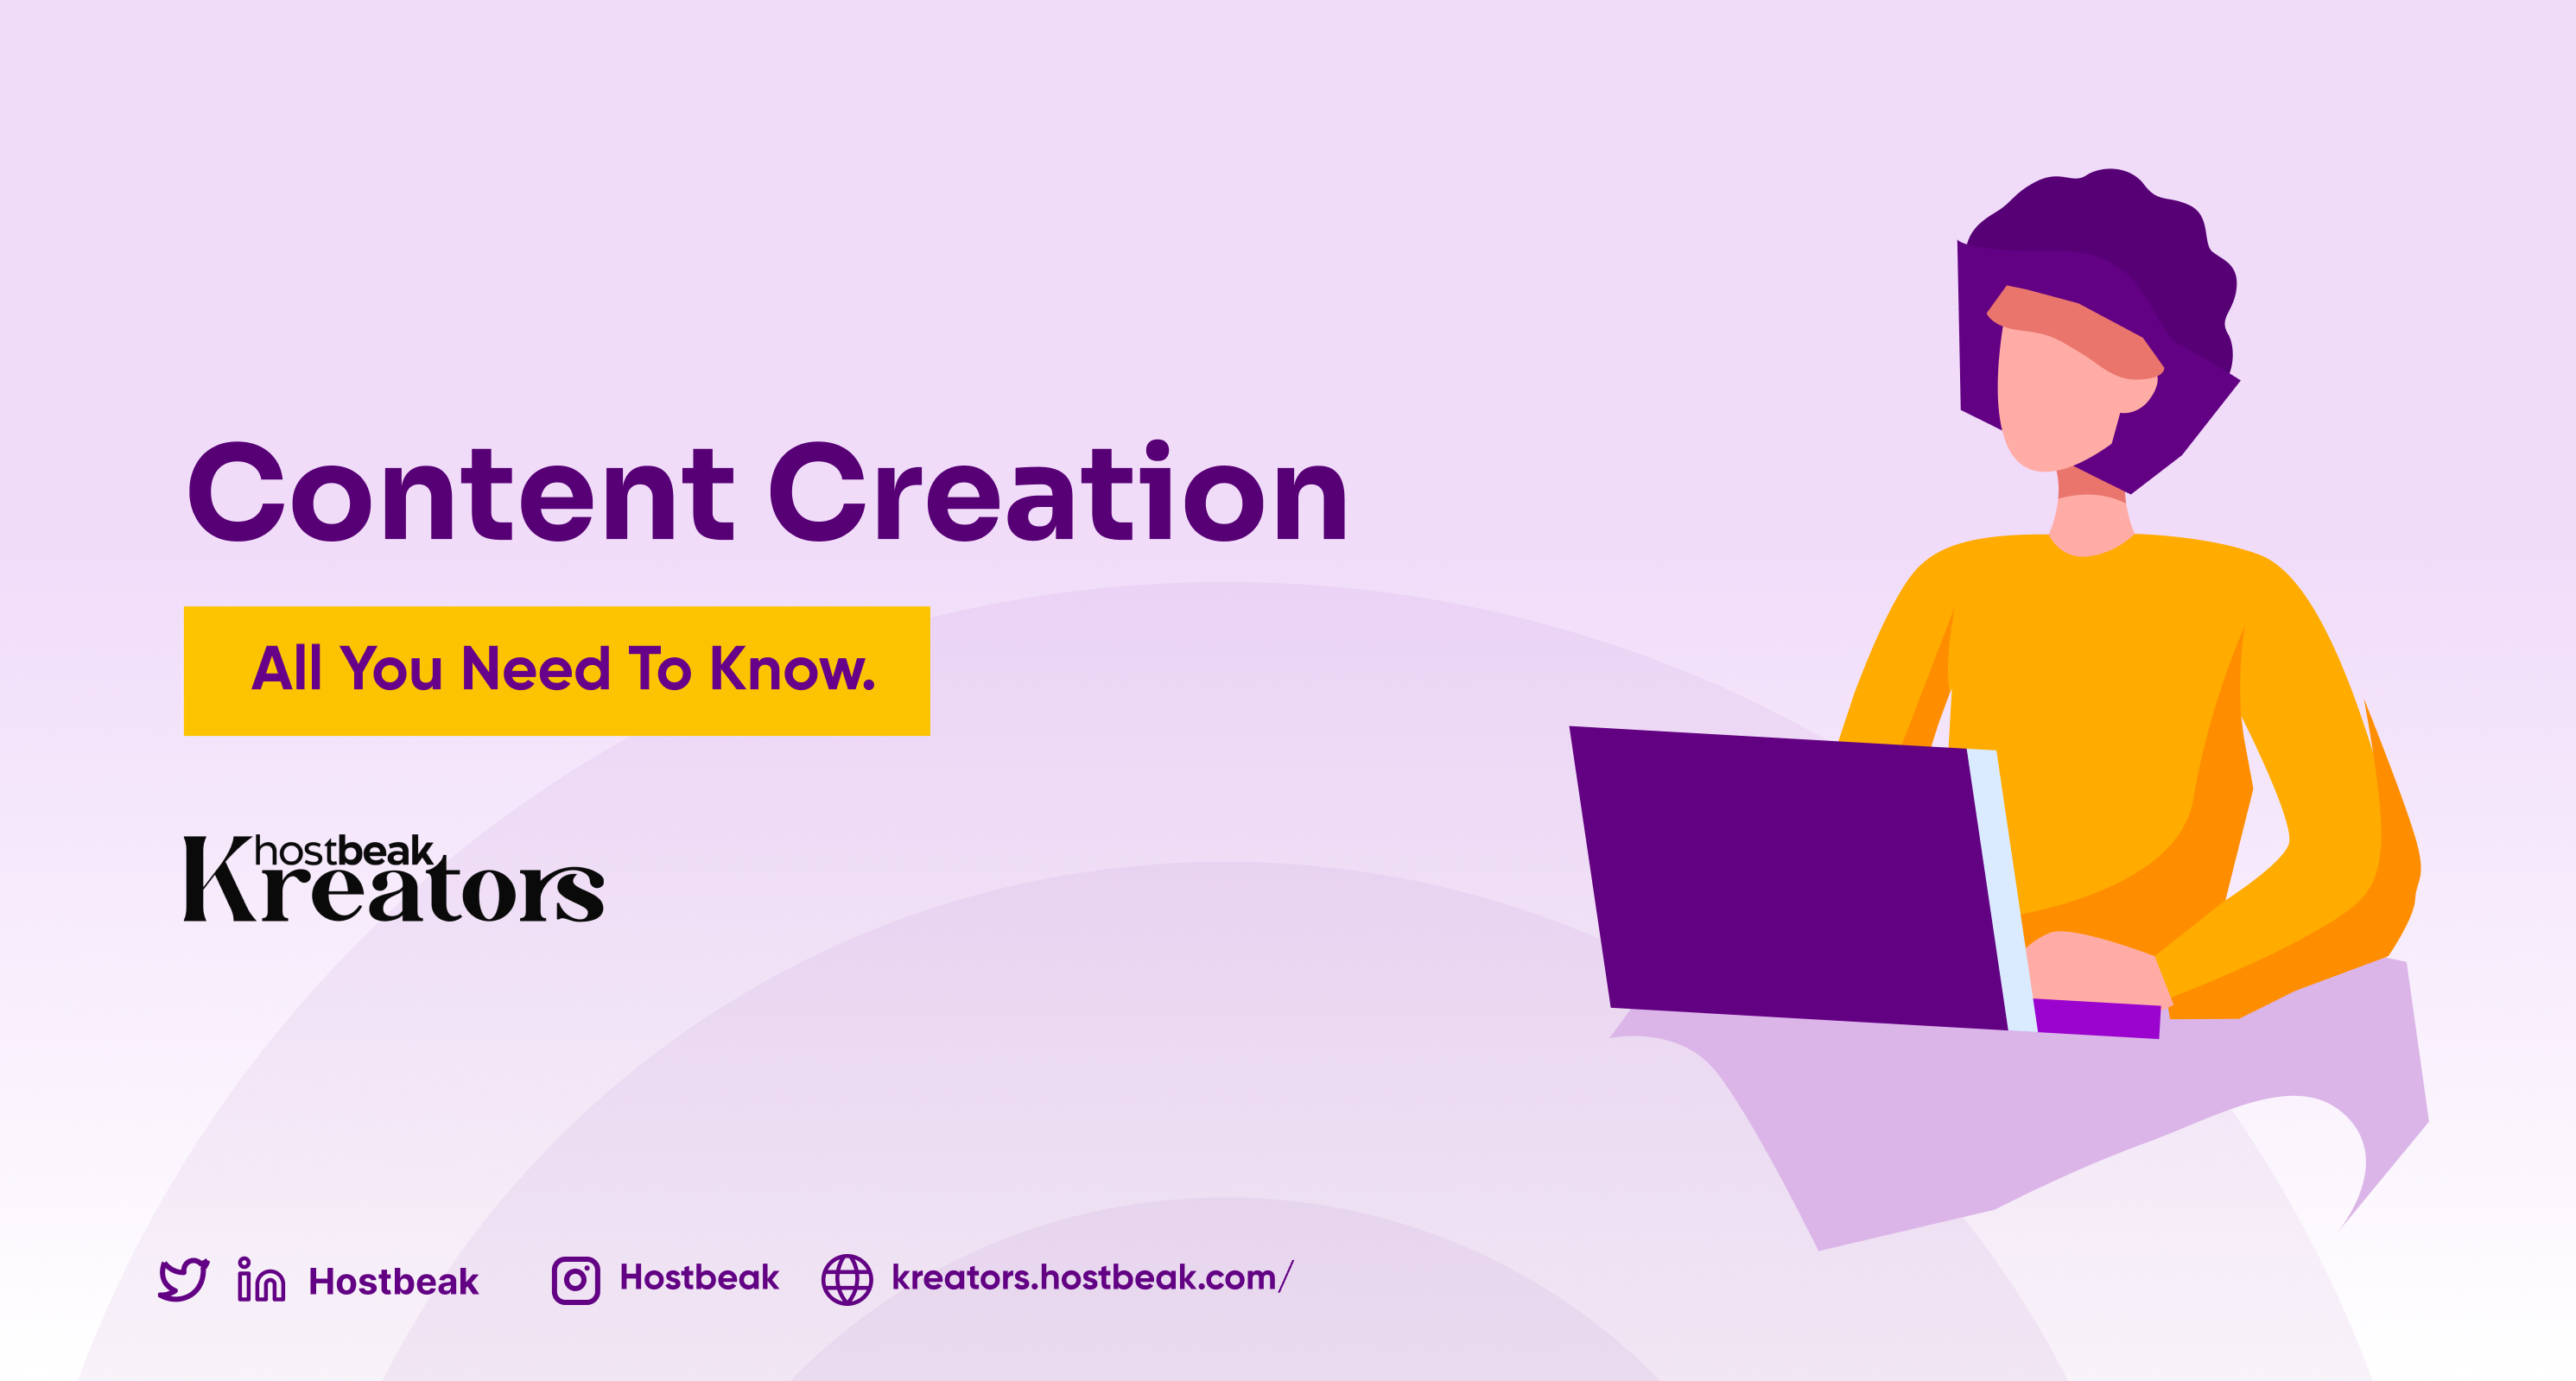 Content Creation: All You Need To Know